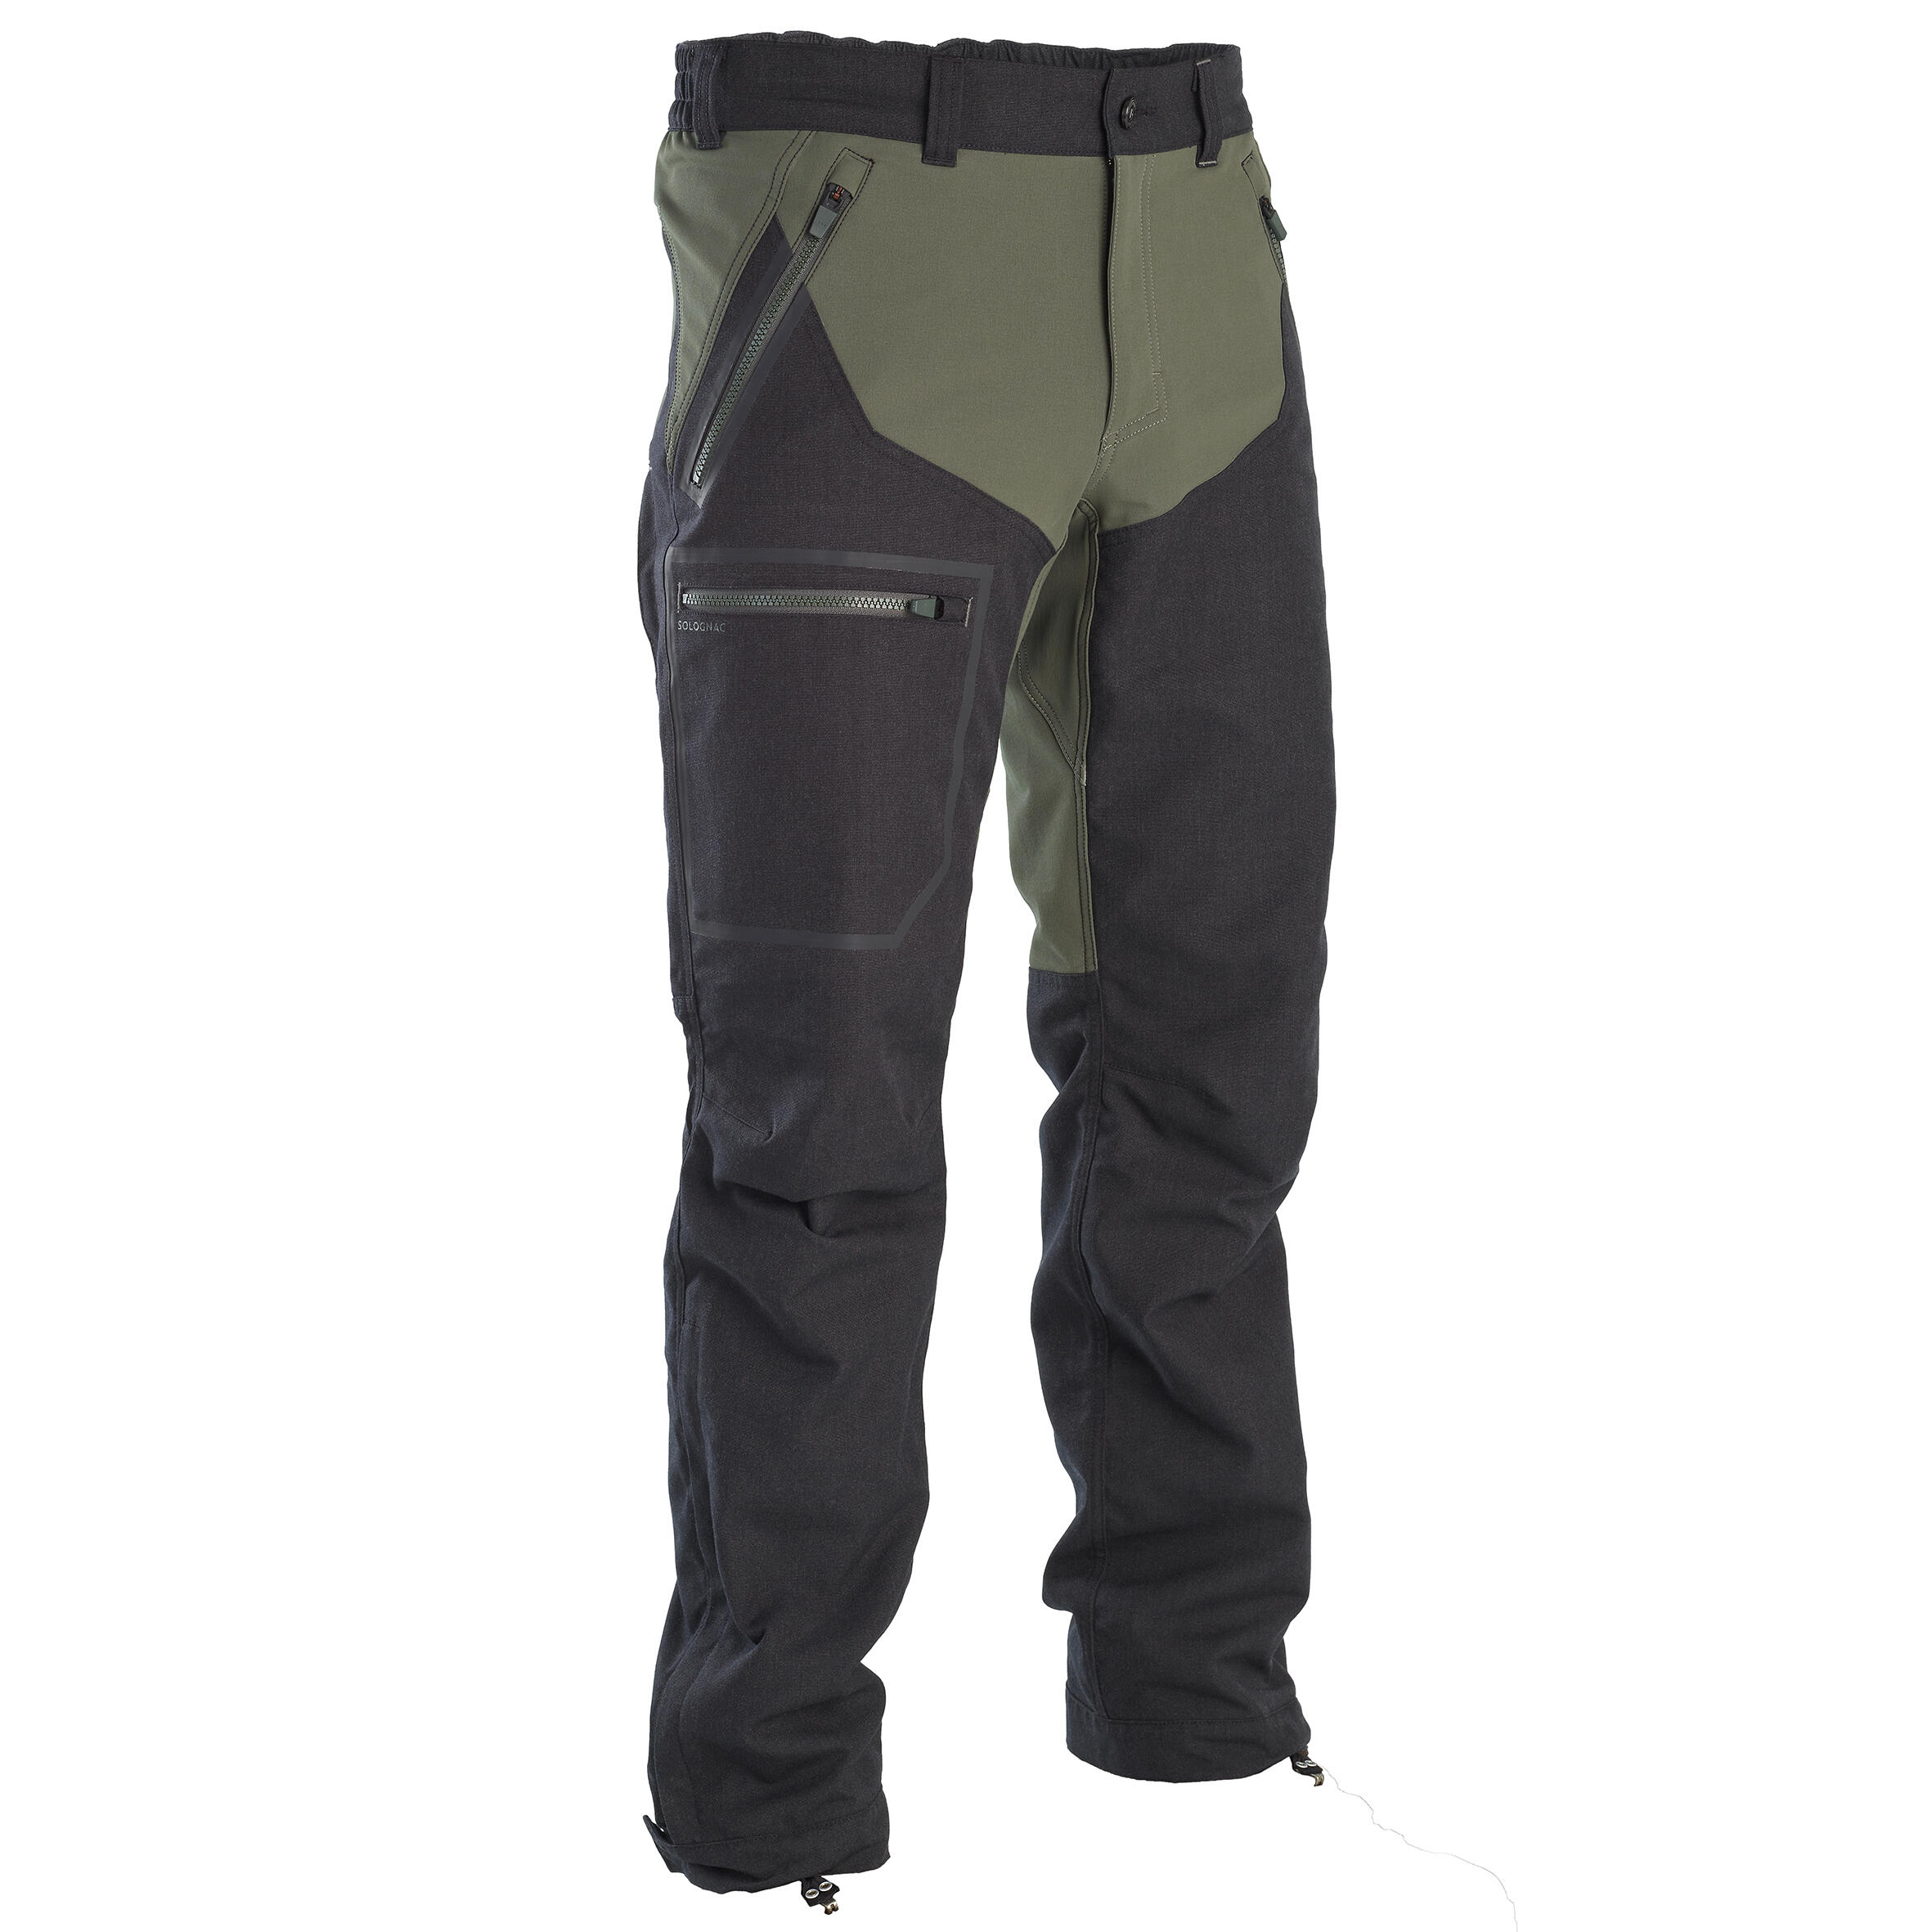 Resistant trousers